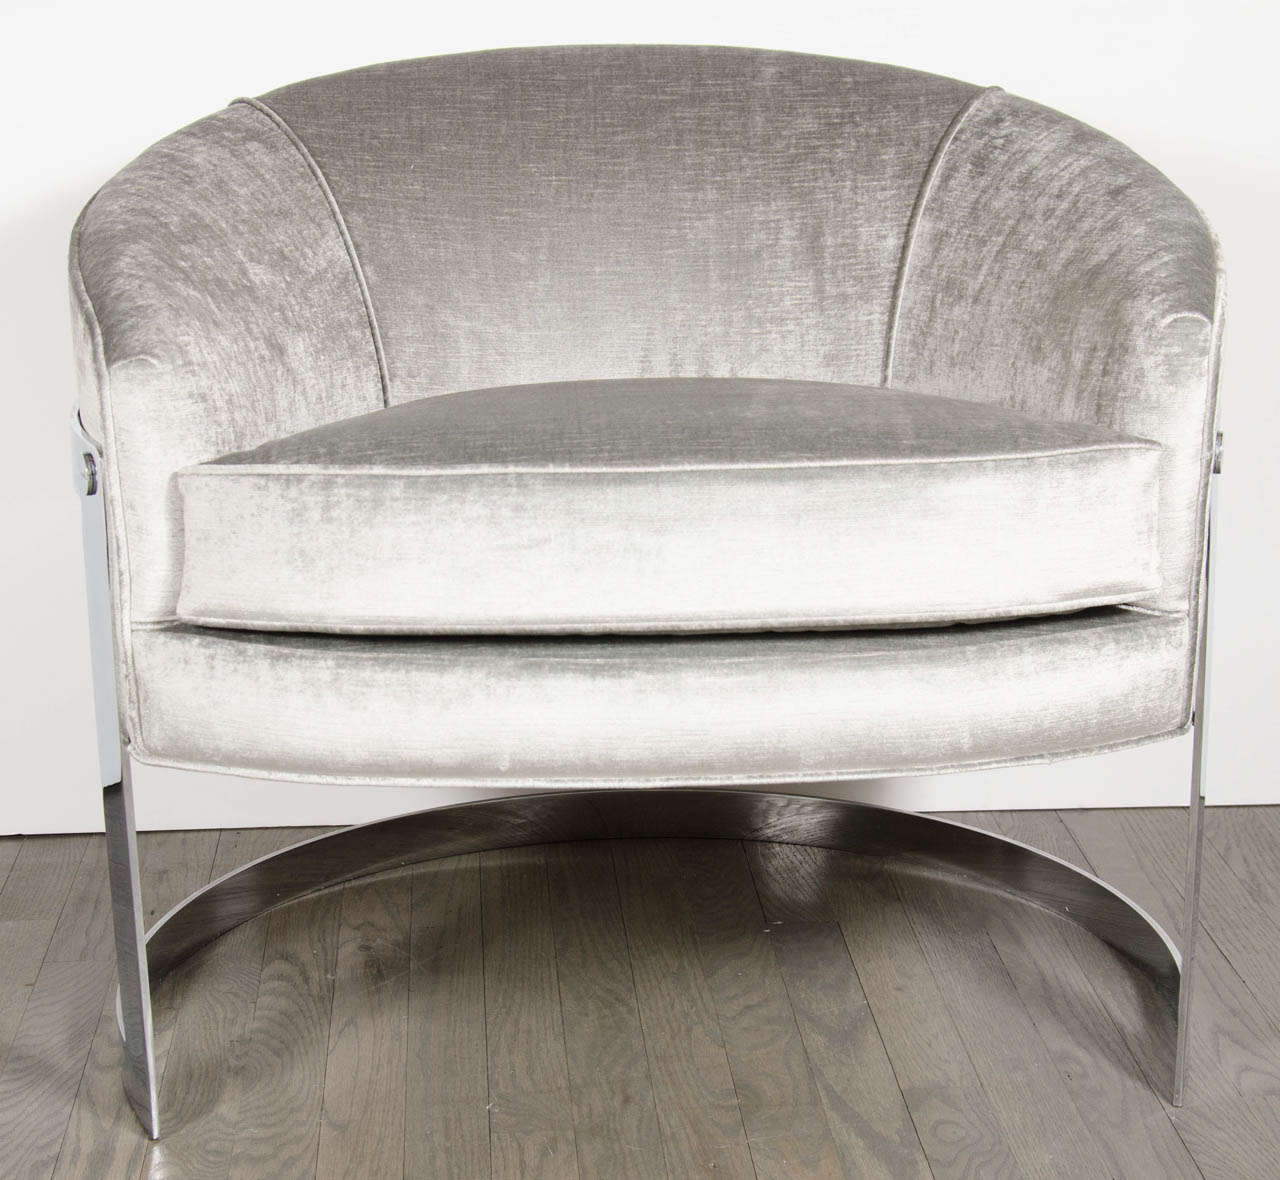 These ultra chic chairs feature a polished chromed banding detailing in a semi-circular design with have been newly upholstered in a lux silvery pearl velvet.